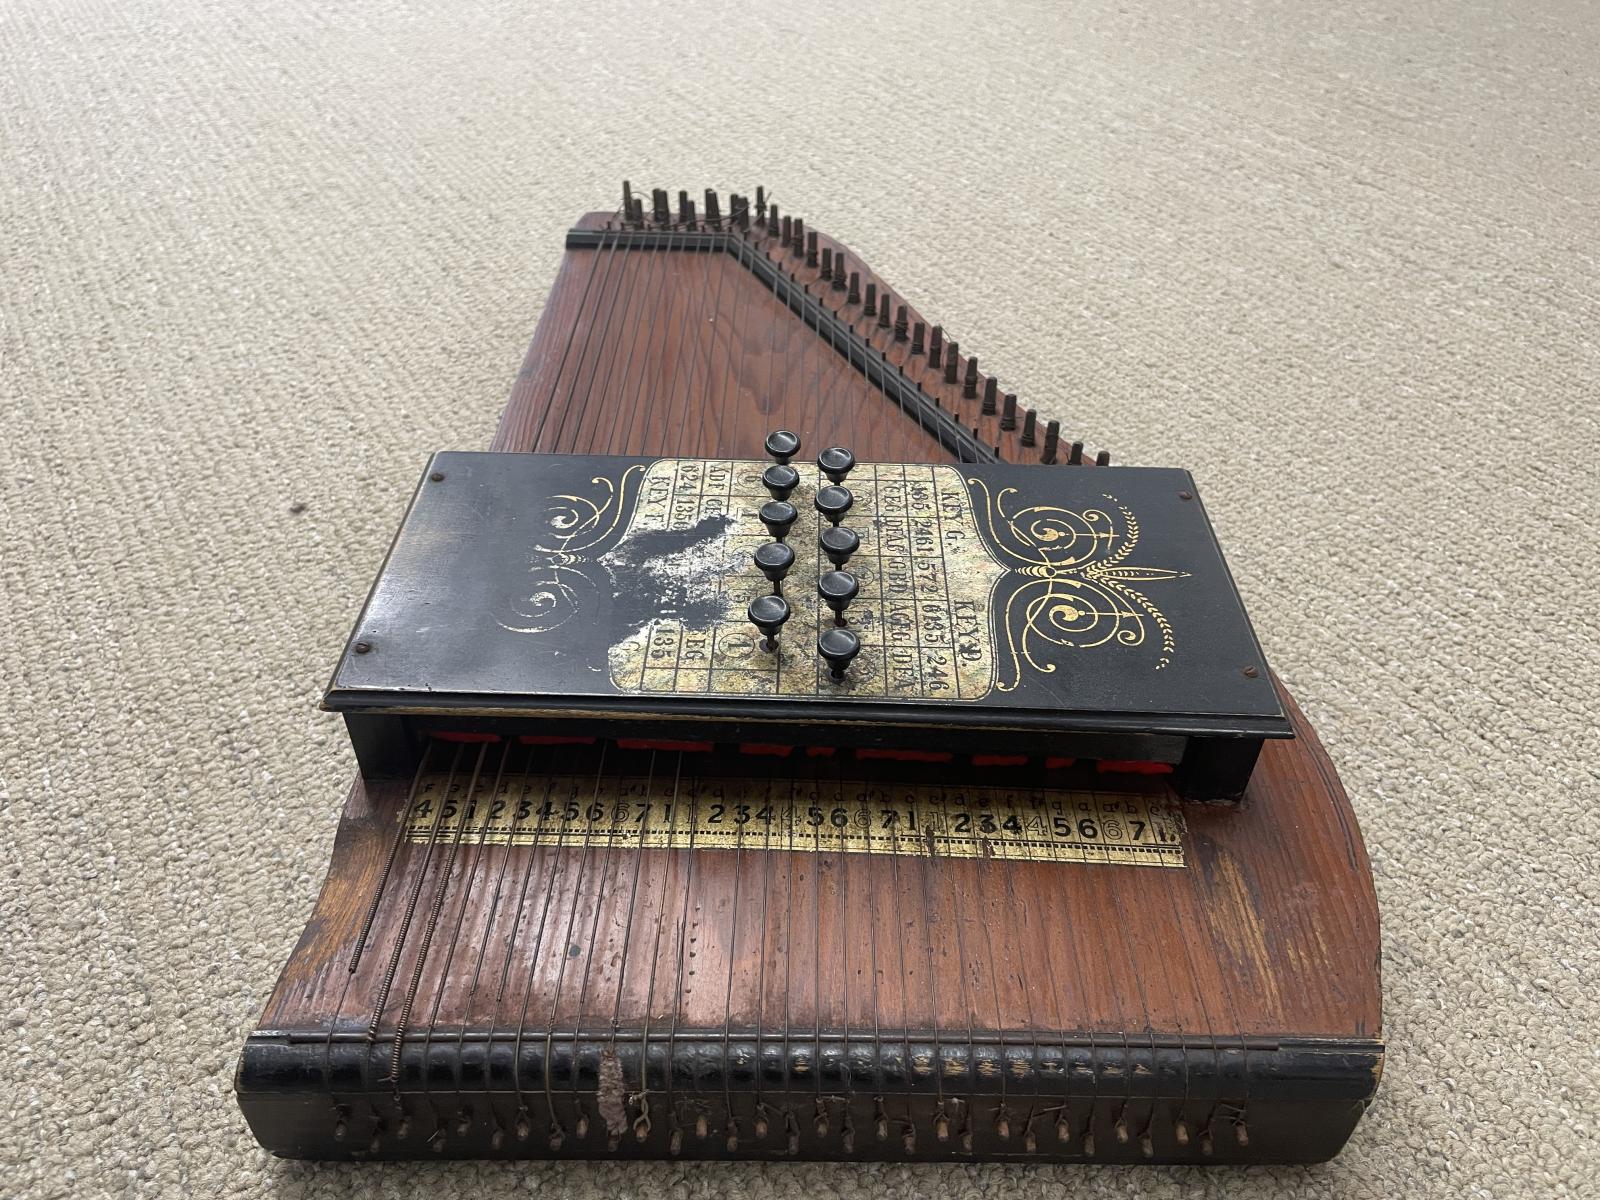 Autoharp end view showing height of the chord box, note / string numbering and metal string nuts